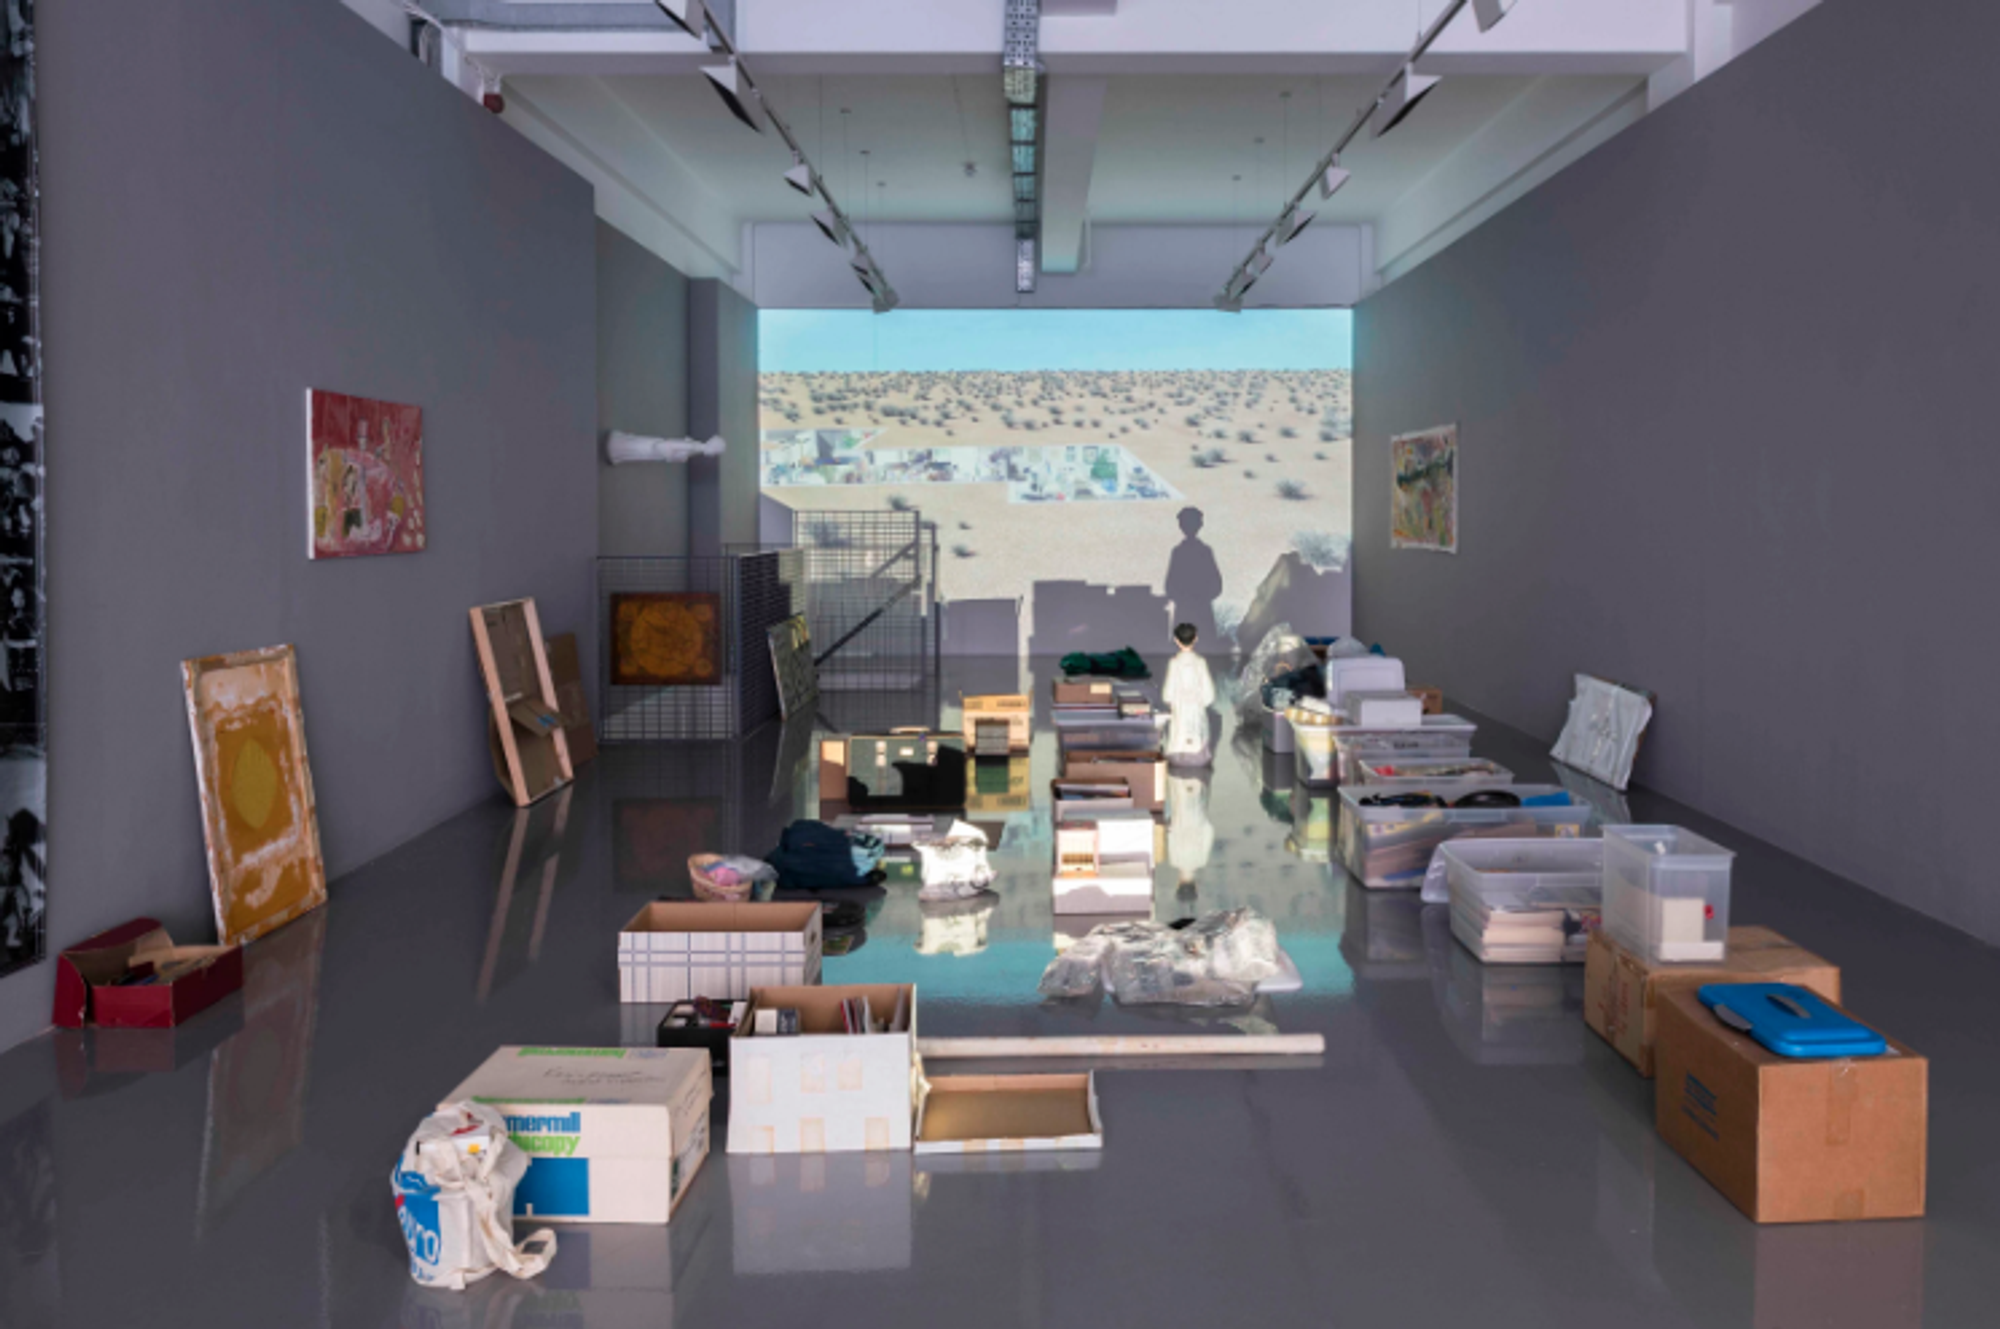 In a gallery space, a collection of objects are arranged as if stored in some sort of garage—artworks leaning against a wall and papers stacked on top of one another in boxes. A desert landscape is projected against the back wall of the gallery space. 